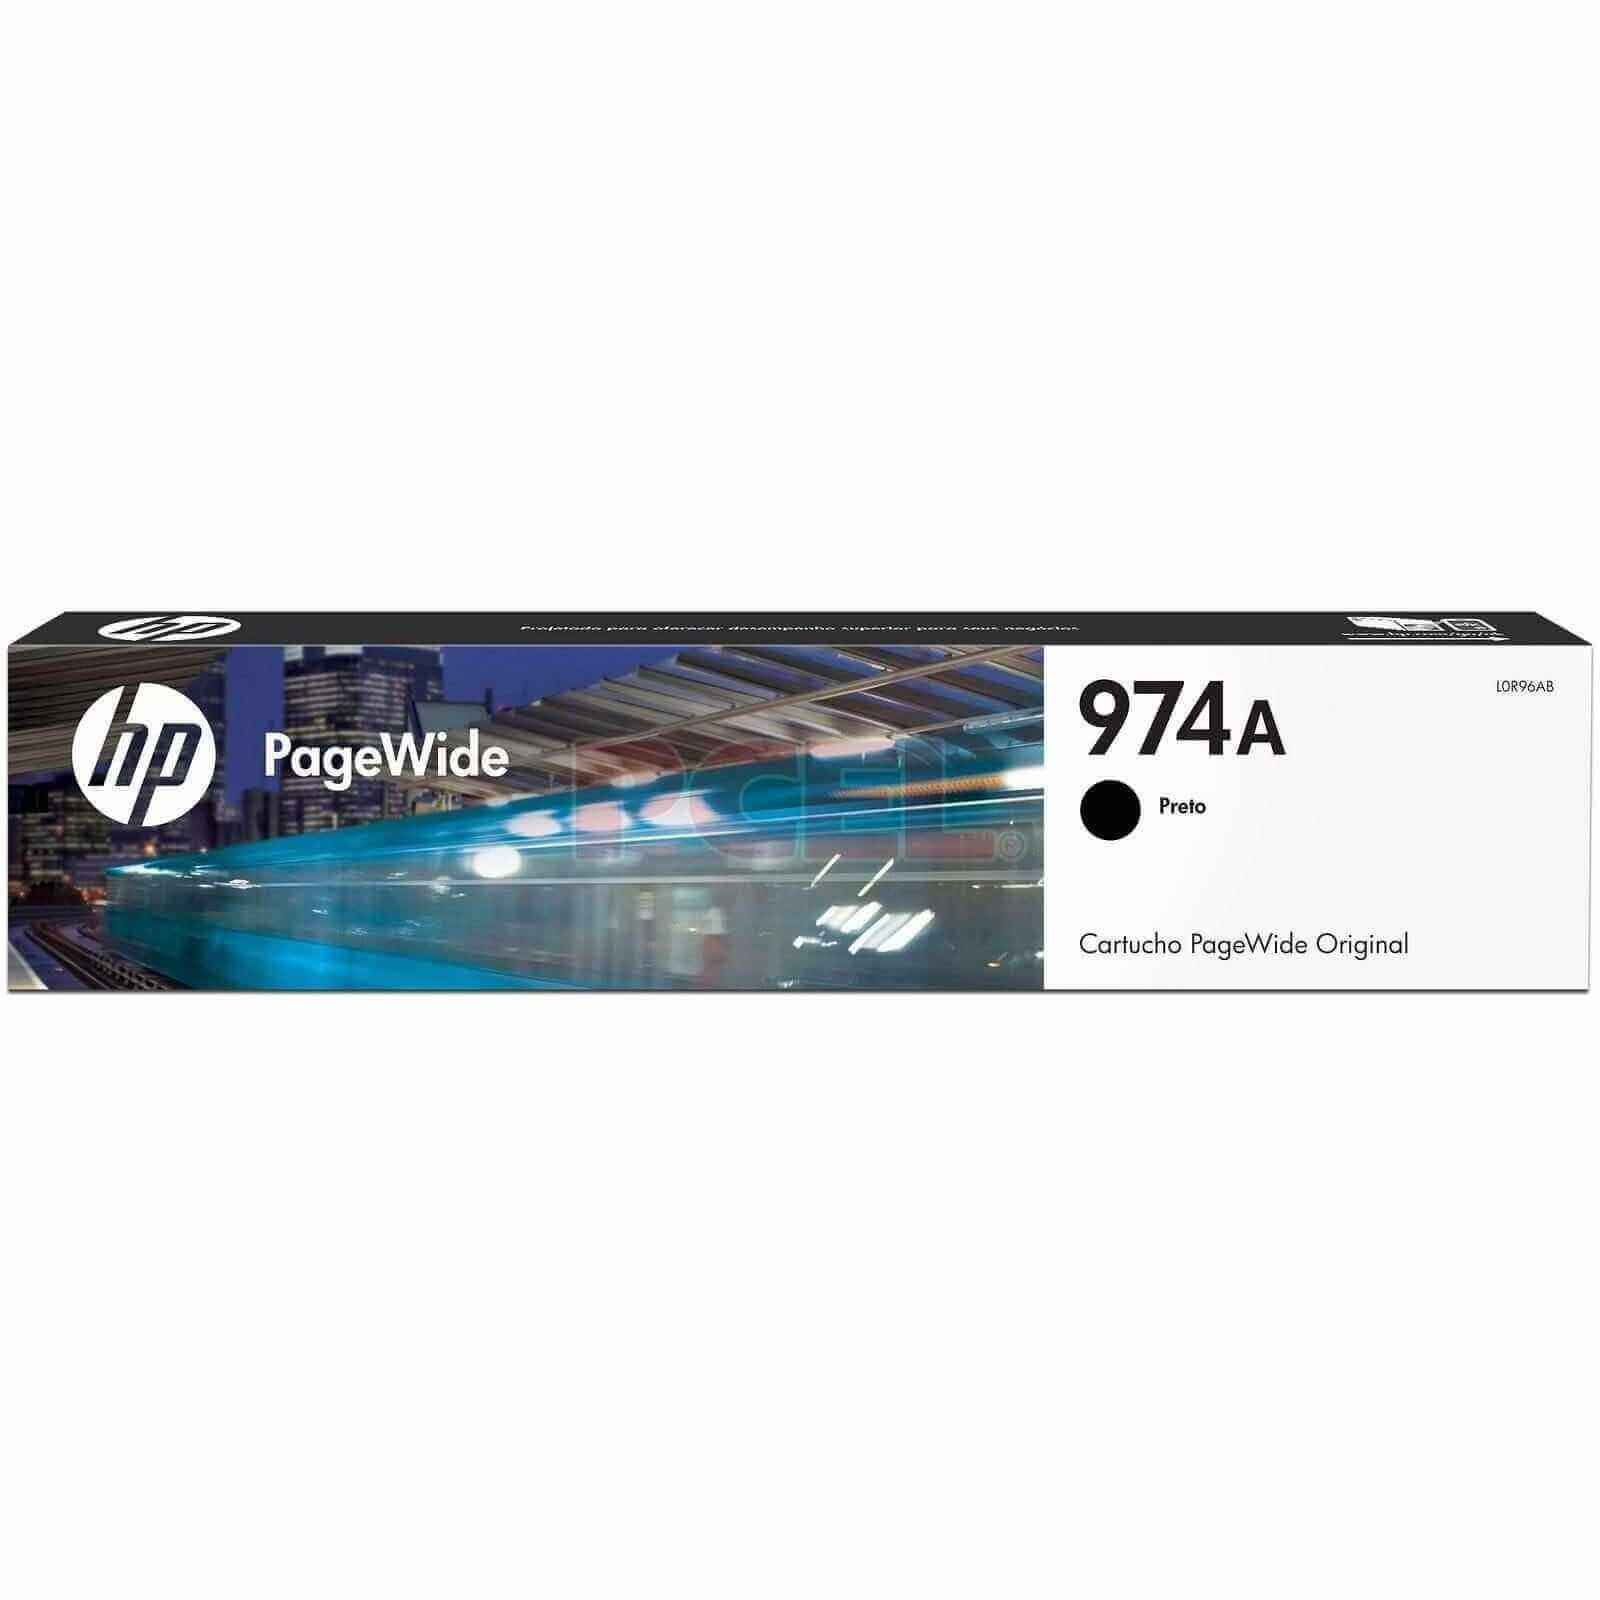 Tinta Hp Pagewide 974A-Negro